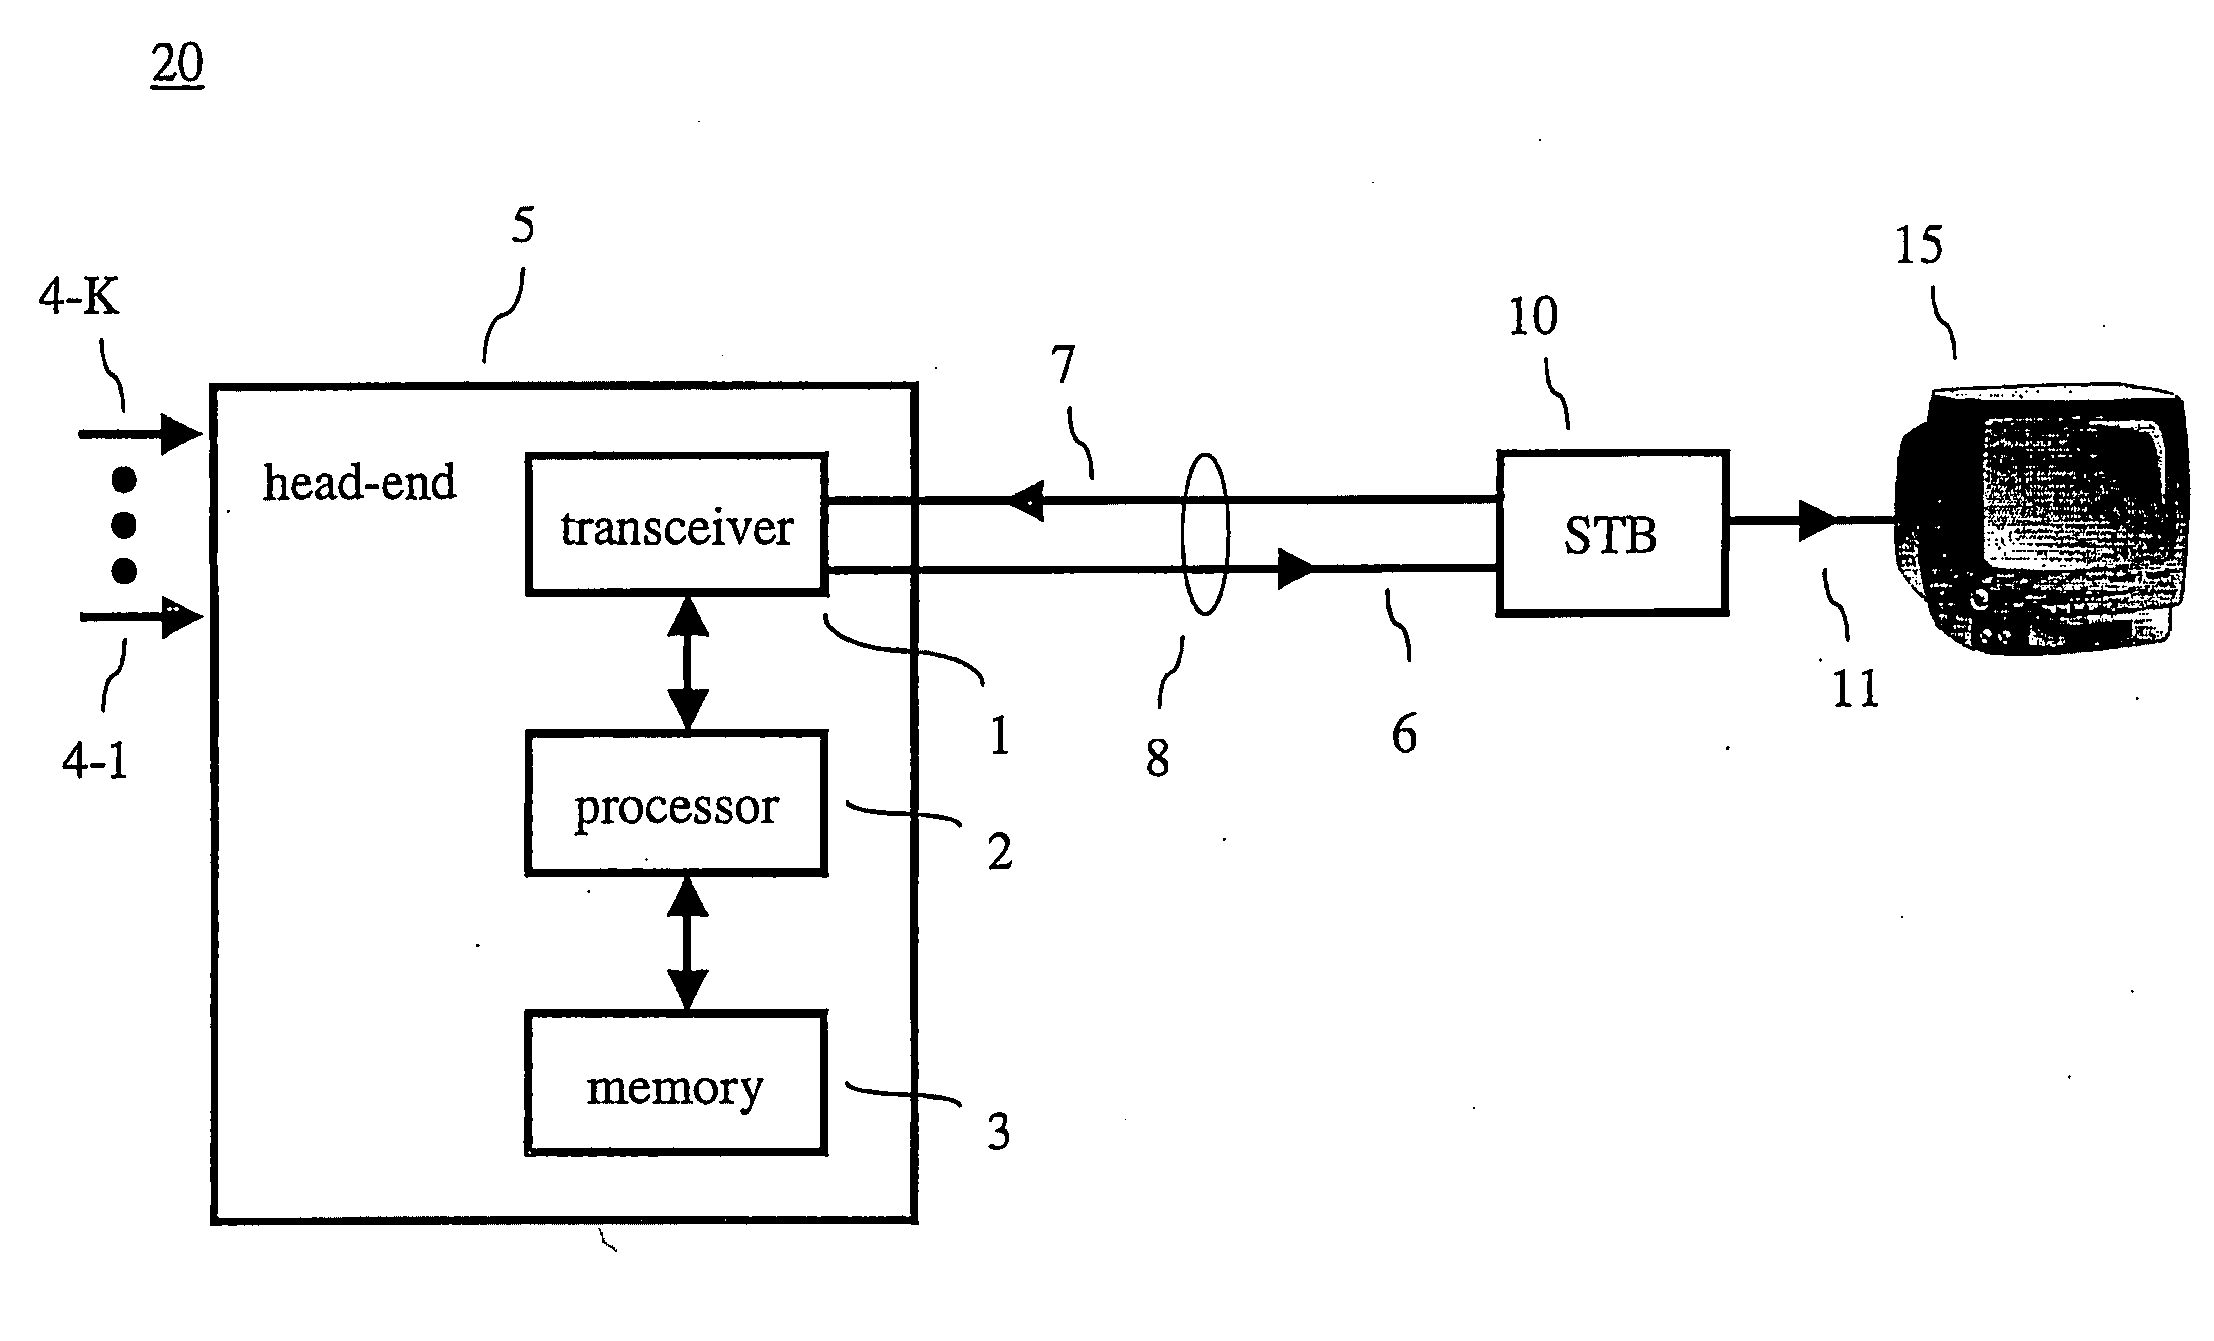 Method and Apparatus for Optimizing Bandwith in Broadcast/Multicast Video Systems